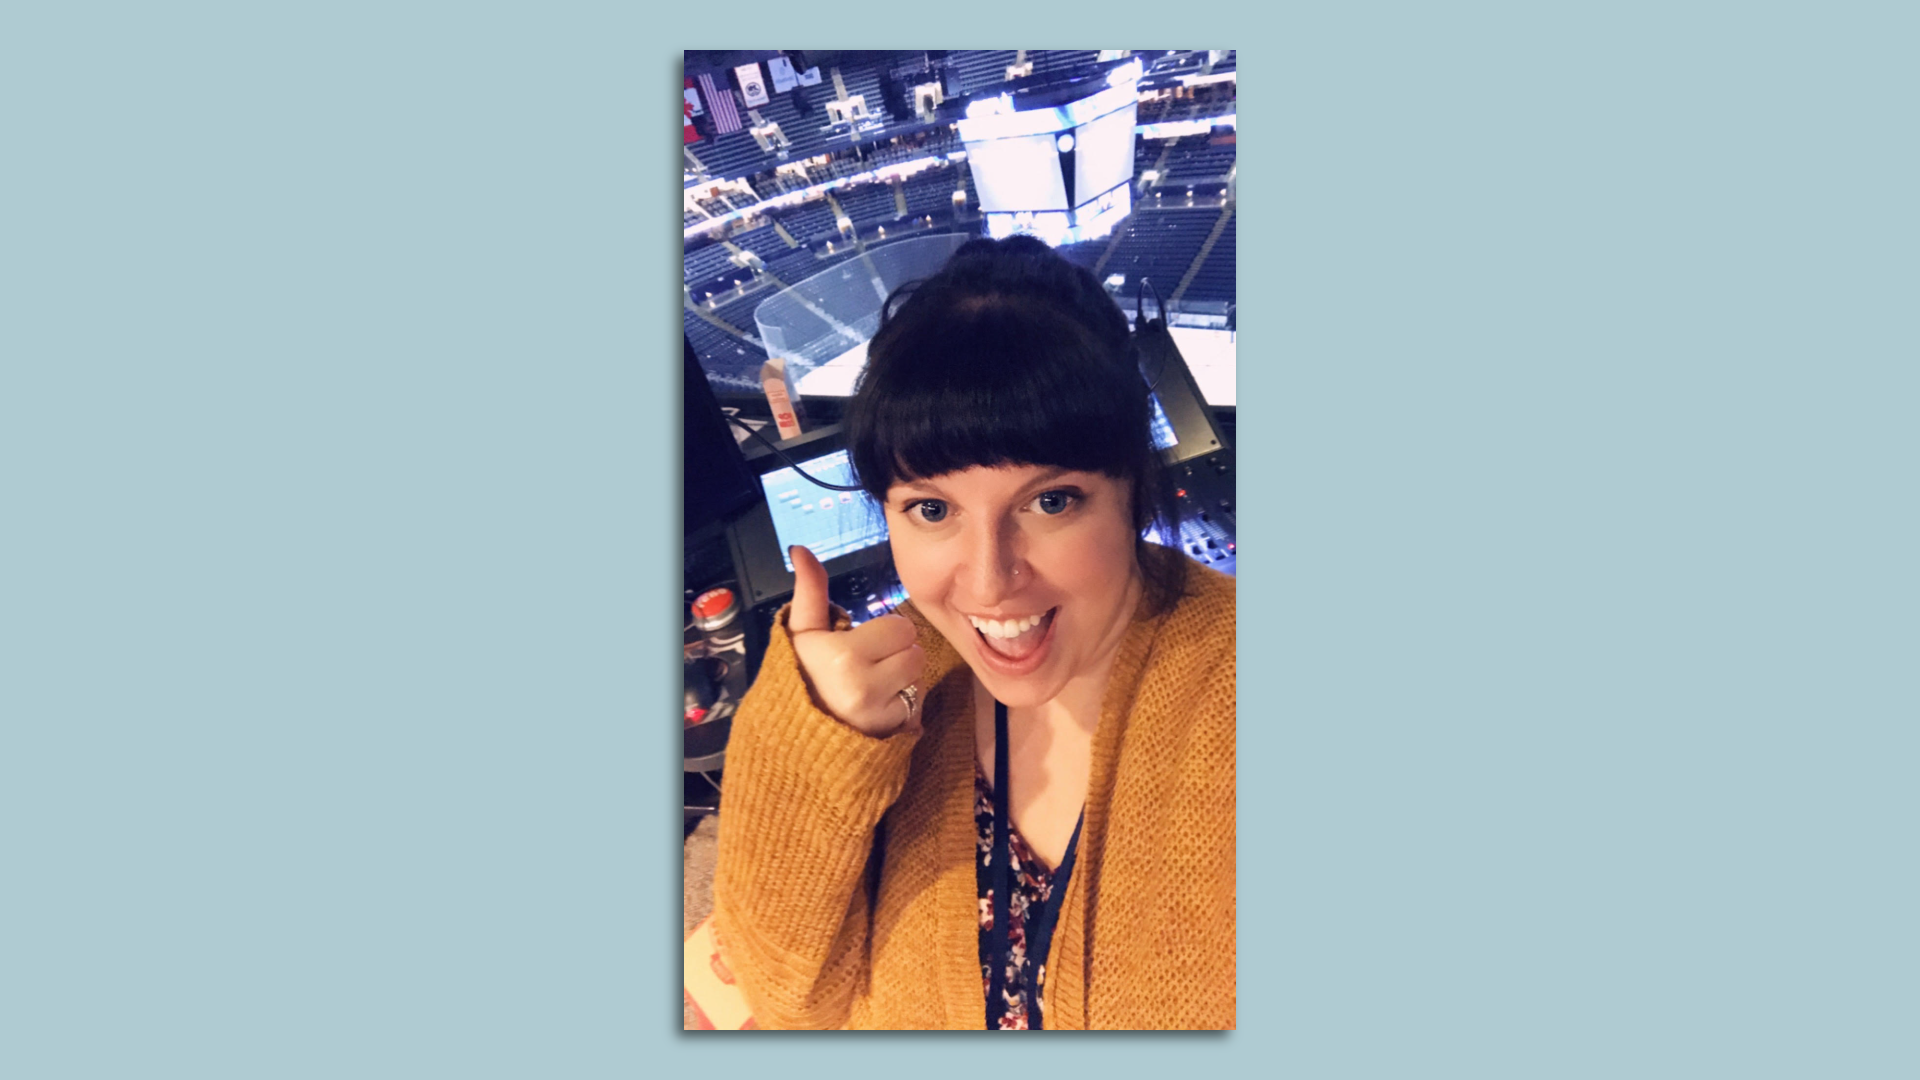 Becca Golden gives a thumbs up inside the Nationwide Arena lighting and sound booth. 